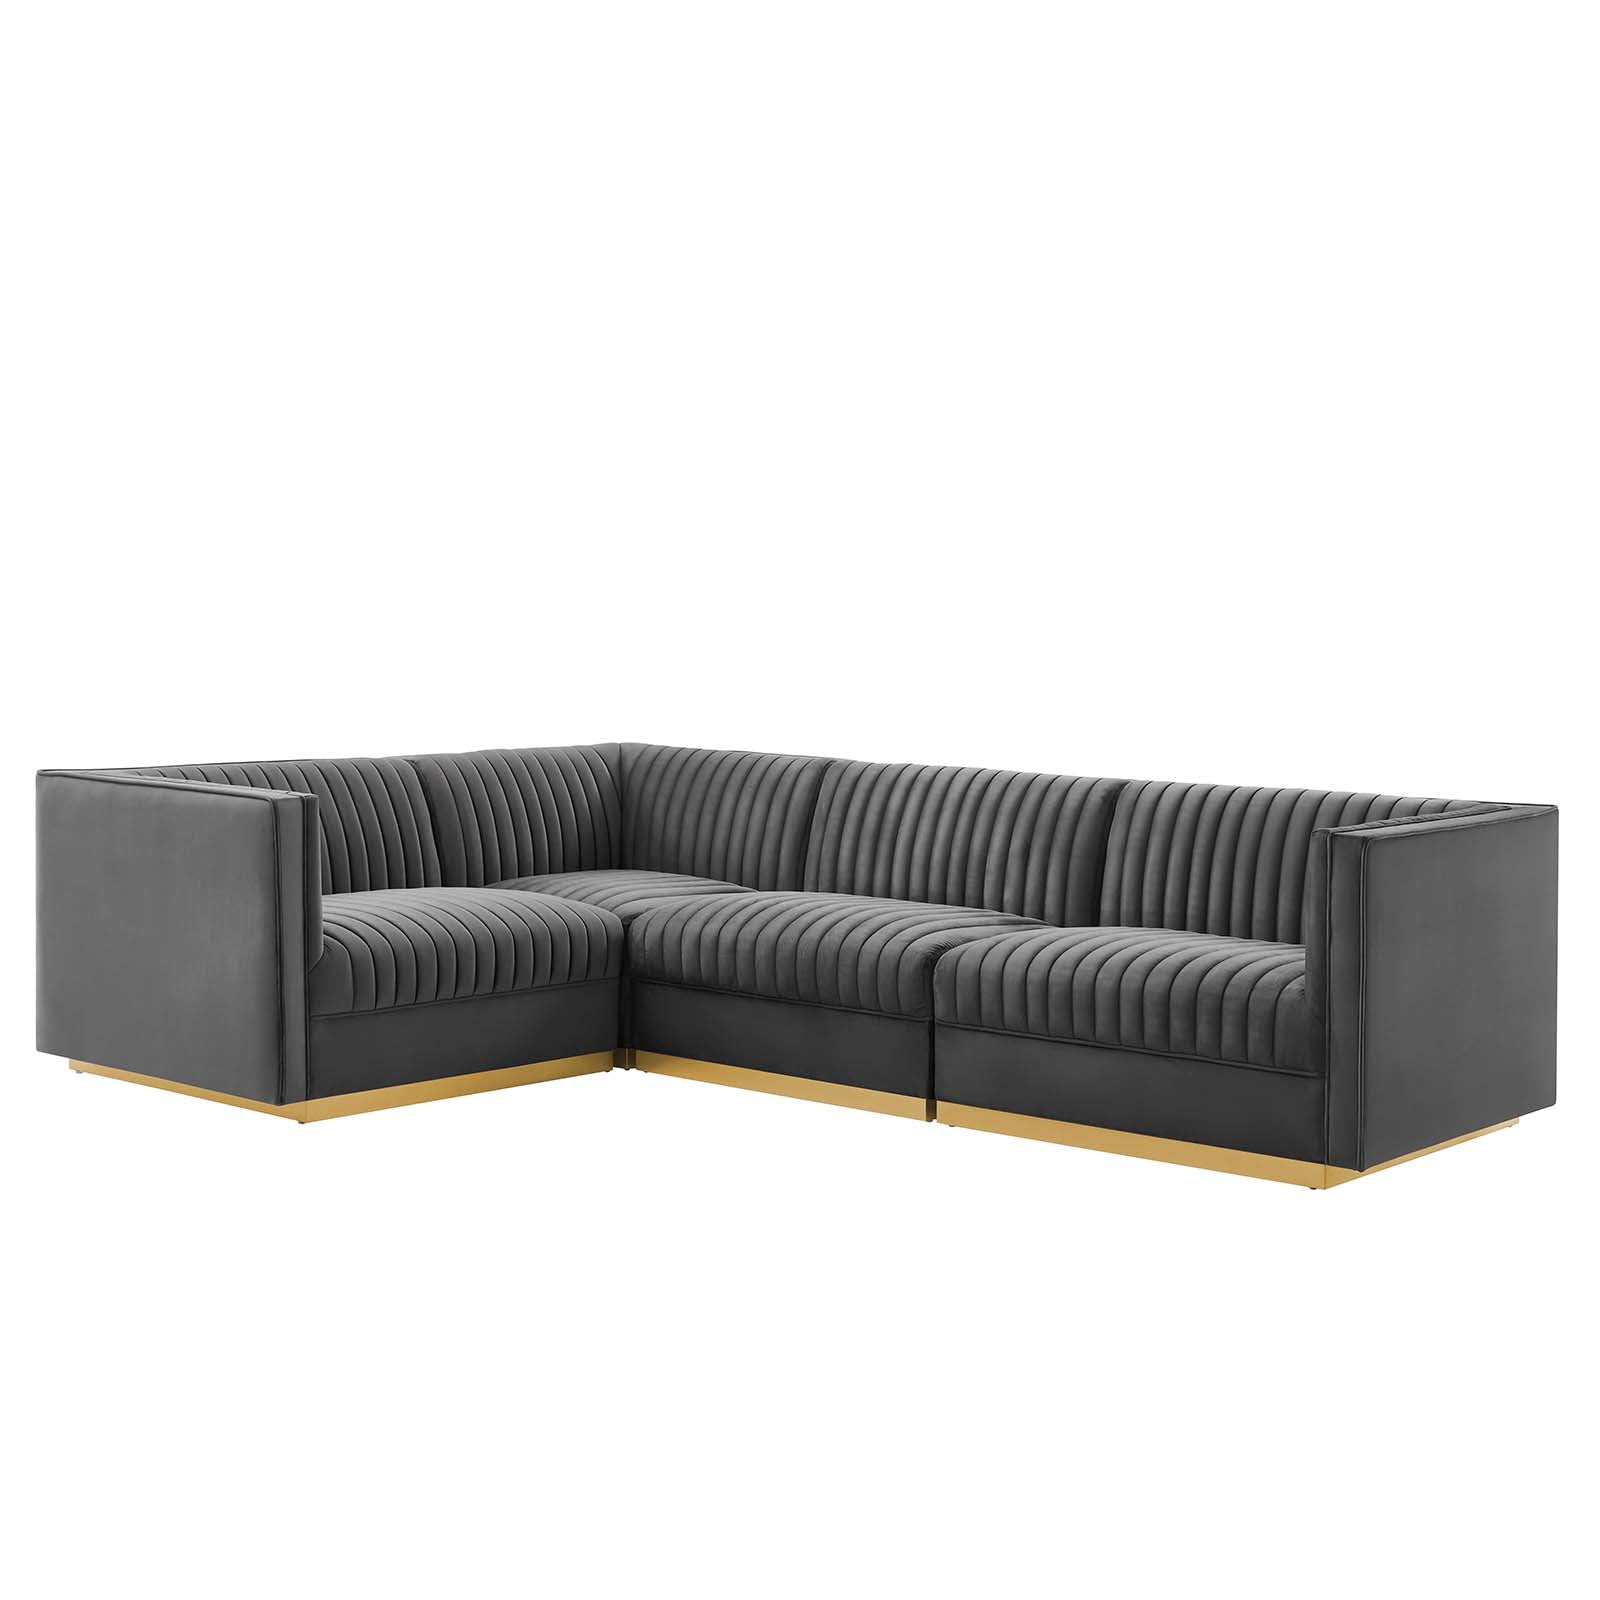 Modway Sectional Sofas - Sanguine Channel Tufted Performance Velvet 4 Piece Left-Facing Modular Sectional Sofa Gray